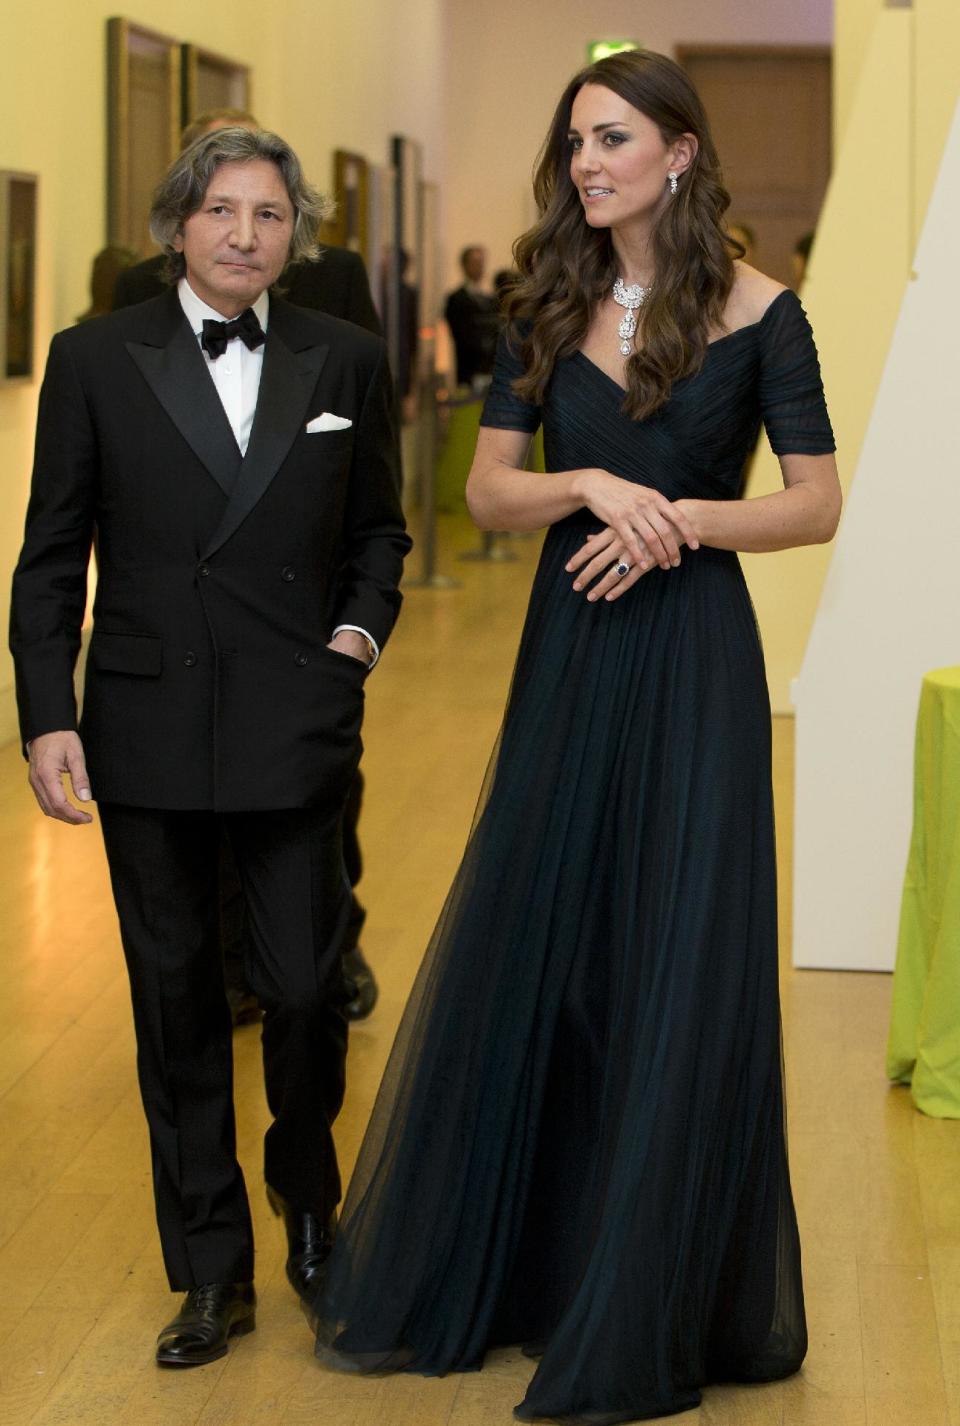 Kate Duchess of Cambridge walks with a guest a fund raising gala at the National Portrait Gallery in London, Tuesday, Feb. 11, 2014. The Duchess is wearing a dress by British designer Jenny Packham and a necklace on loan from Queen Elizabeth II that was given to the Queen as a gift for her wedding in 1947. (AP Photo/Alastair Grant, Pool)